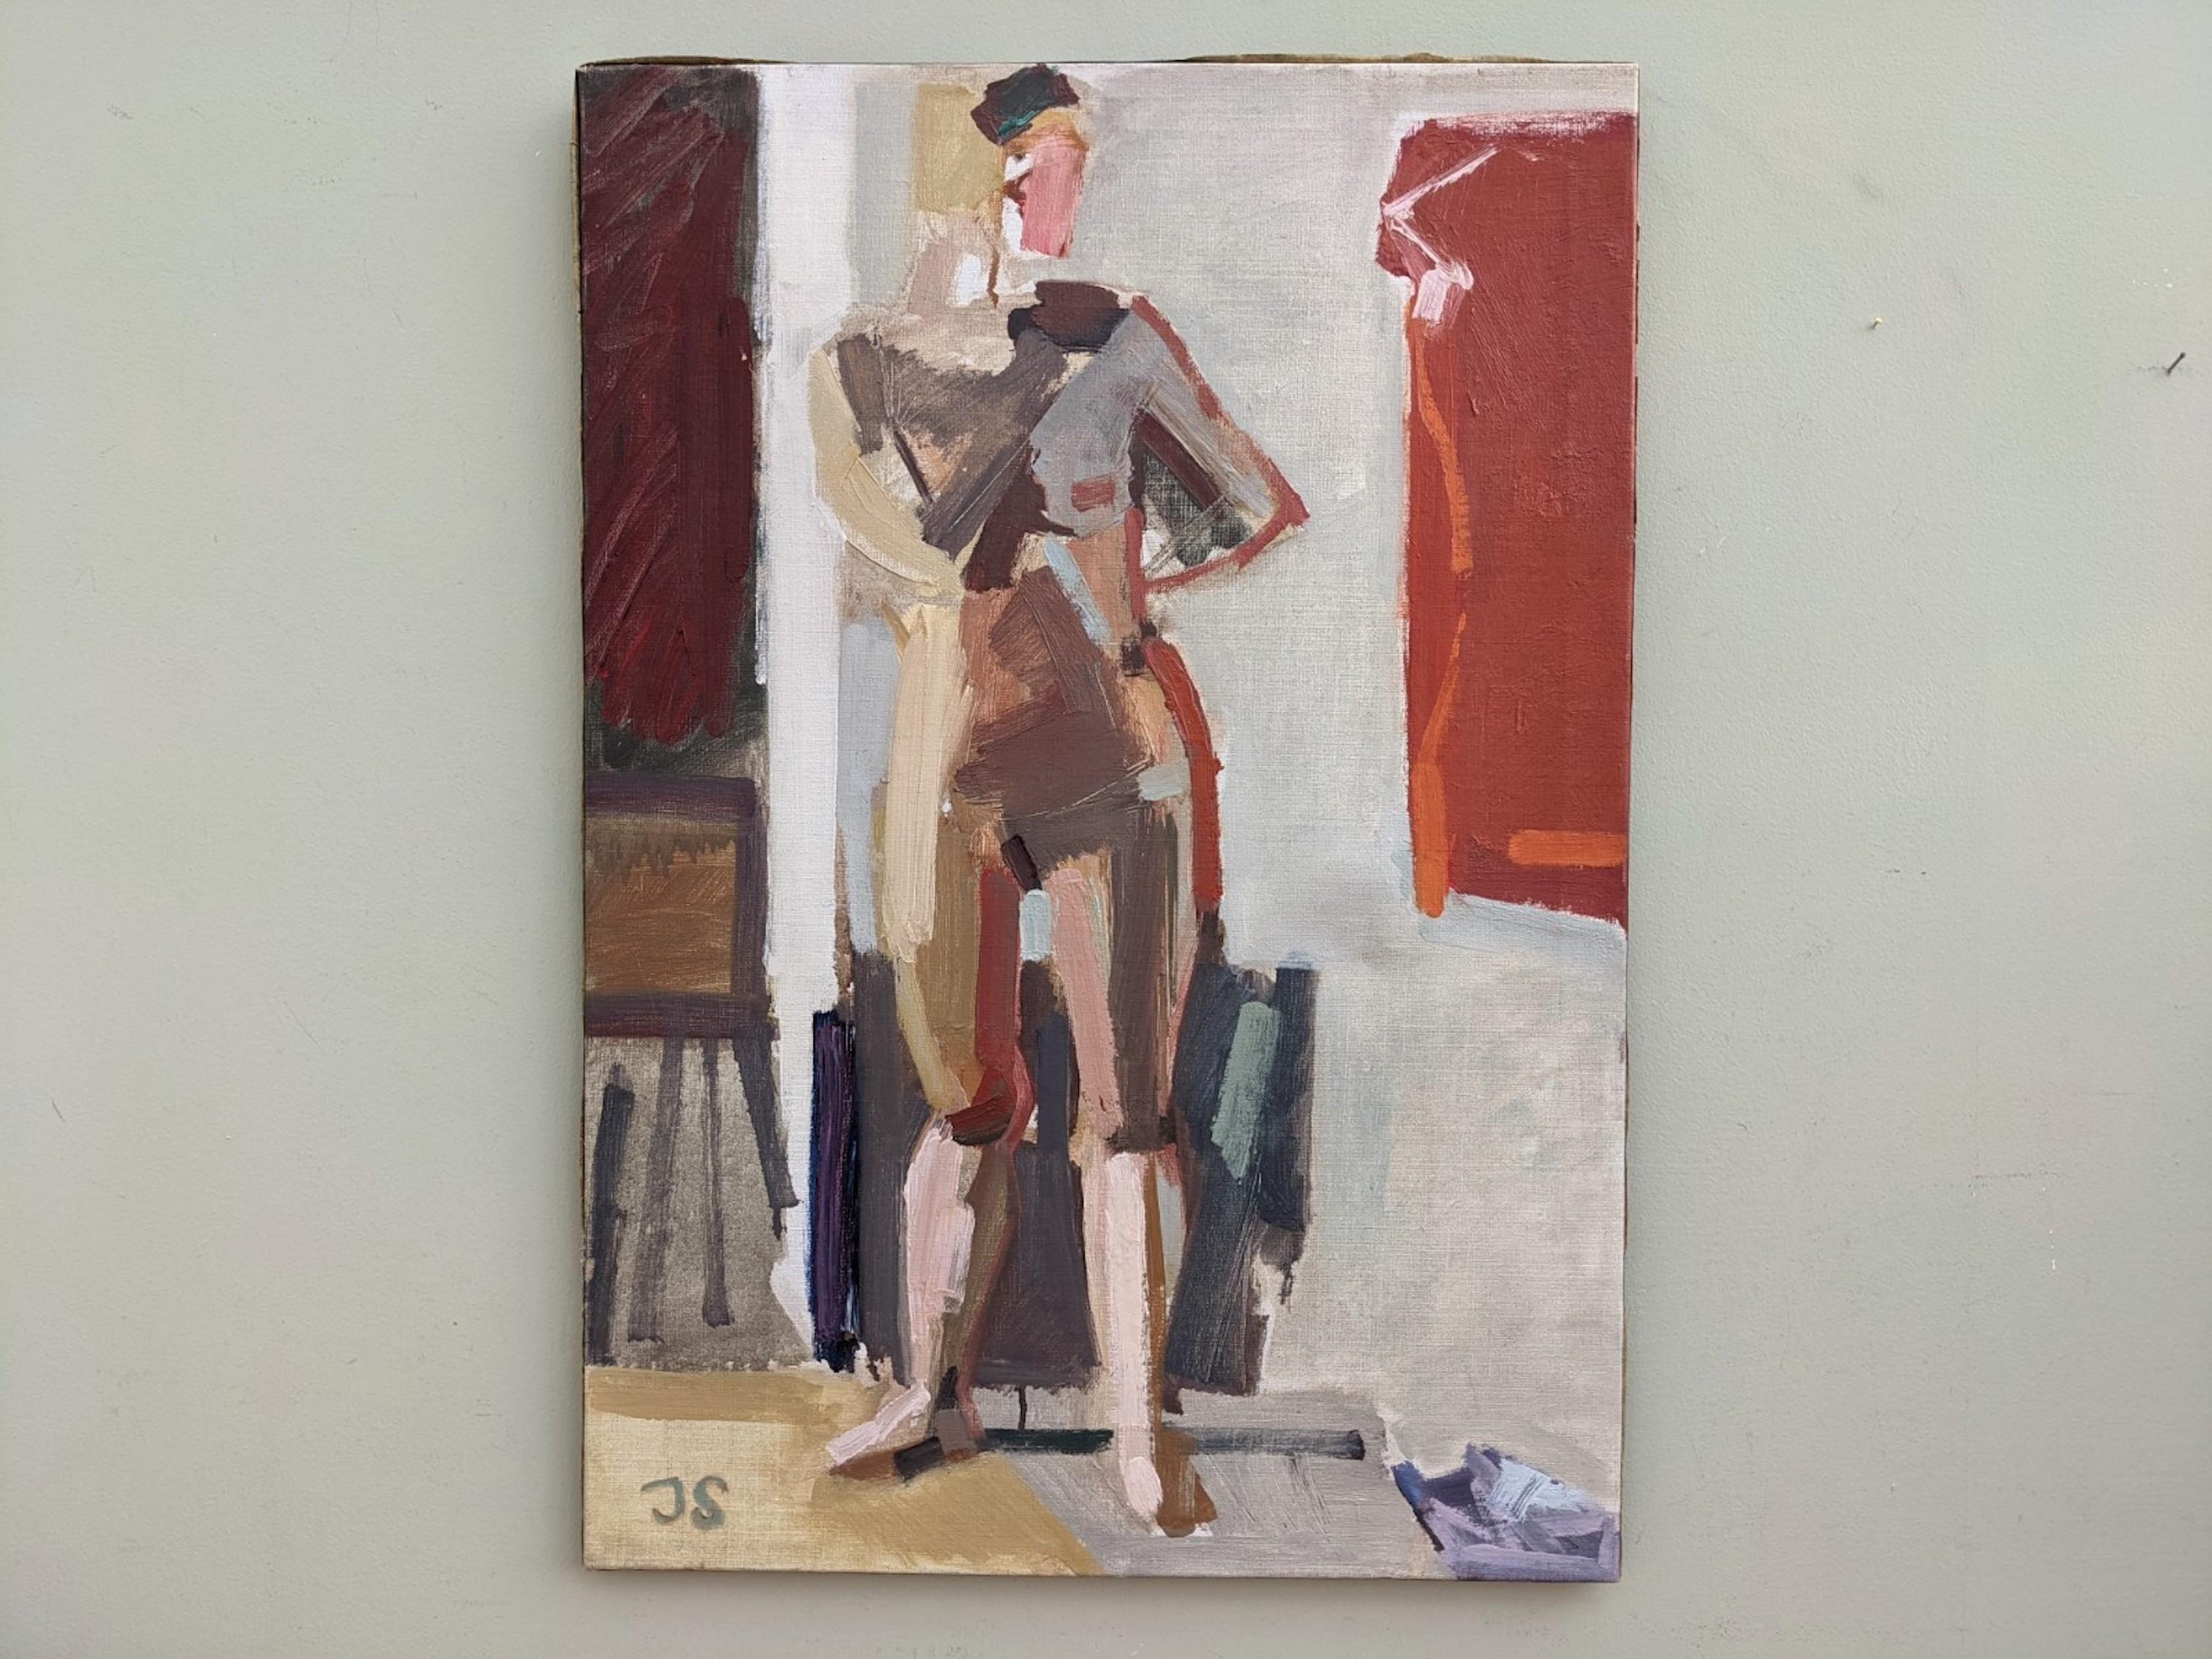 STUDIO NUDE
Size: 68 x 47 cm 
Oil on canvas

An excellently executed mid century nude composition, painted in oil onto canvas.

The artist’s use of colour to create depth and contrast, his expressive and painterly brushwork, and the placement of